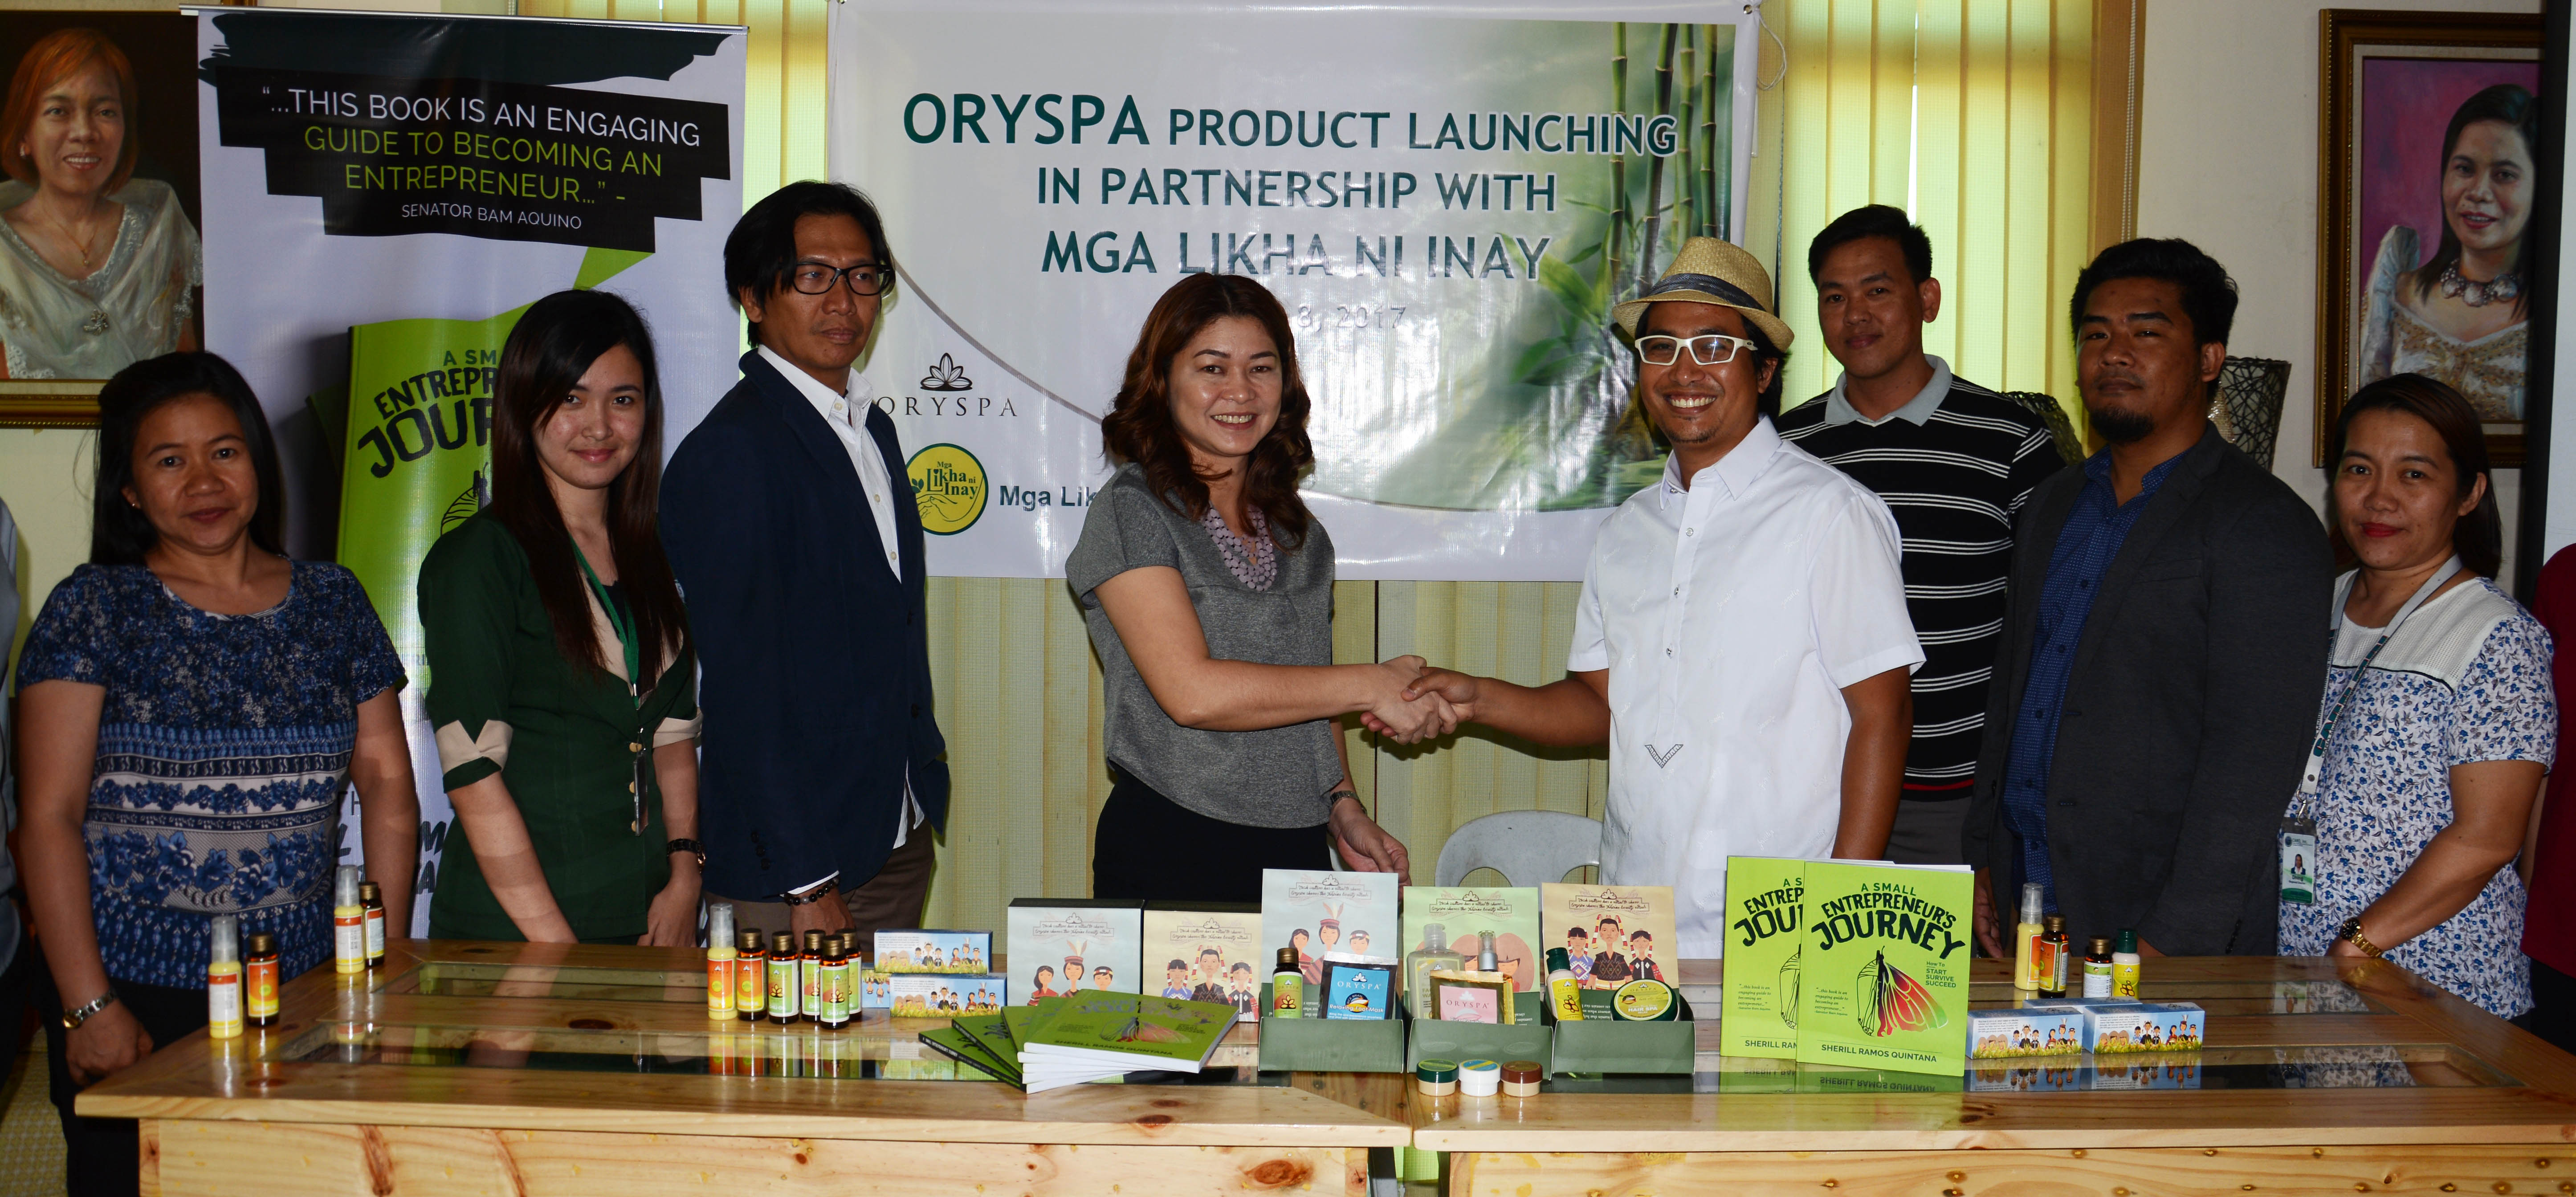 Supporting local: CARD and Oryspa collaborate on wellness products